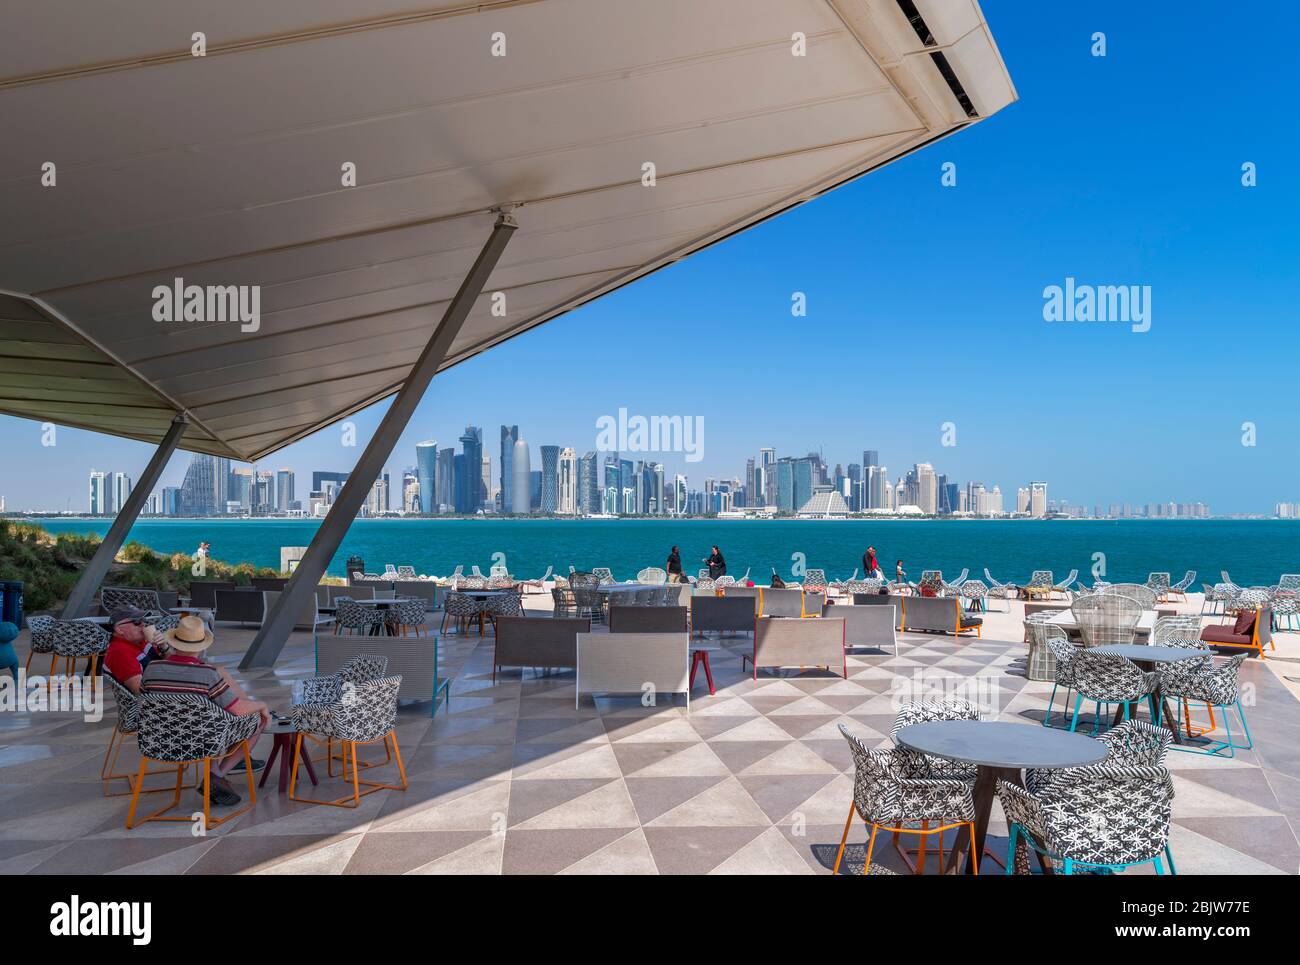 The MIA Park Cafe in MIA Park with the skyline of the West Bay Central Business District behind, Doha, Qatar, Middle East Stock Photo